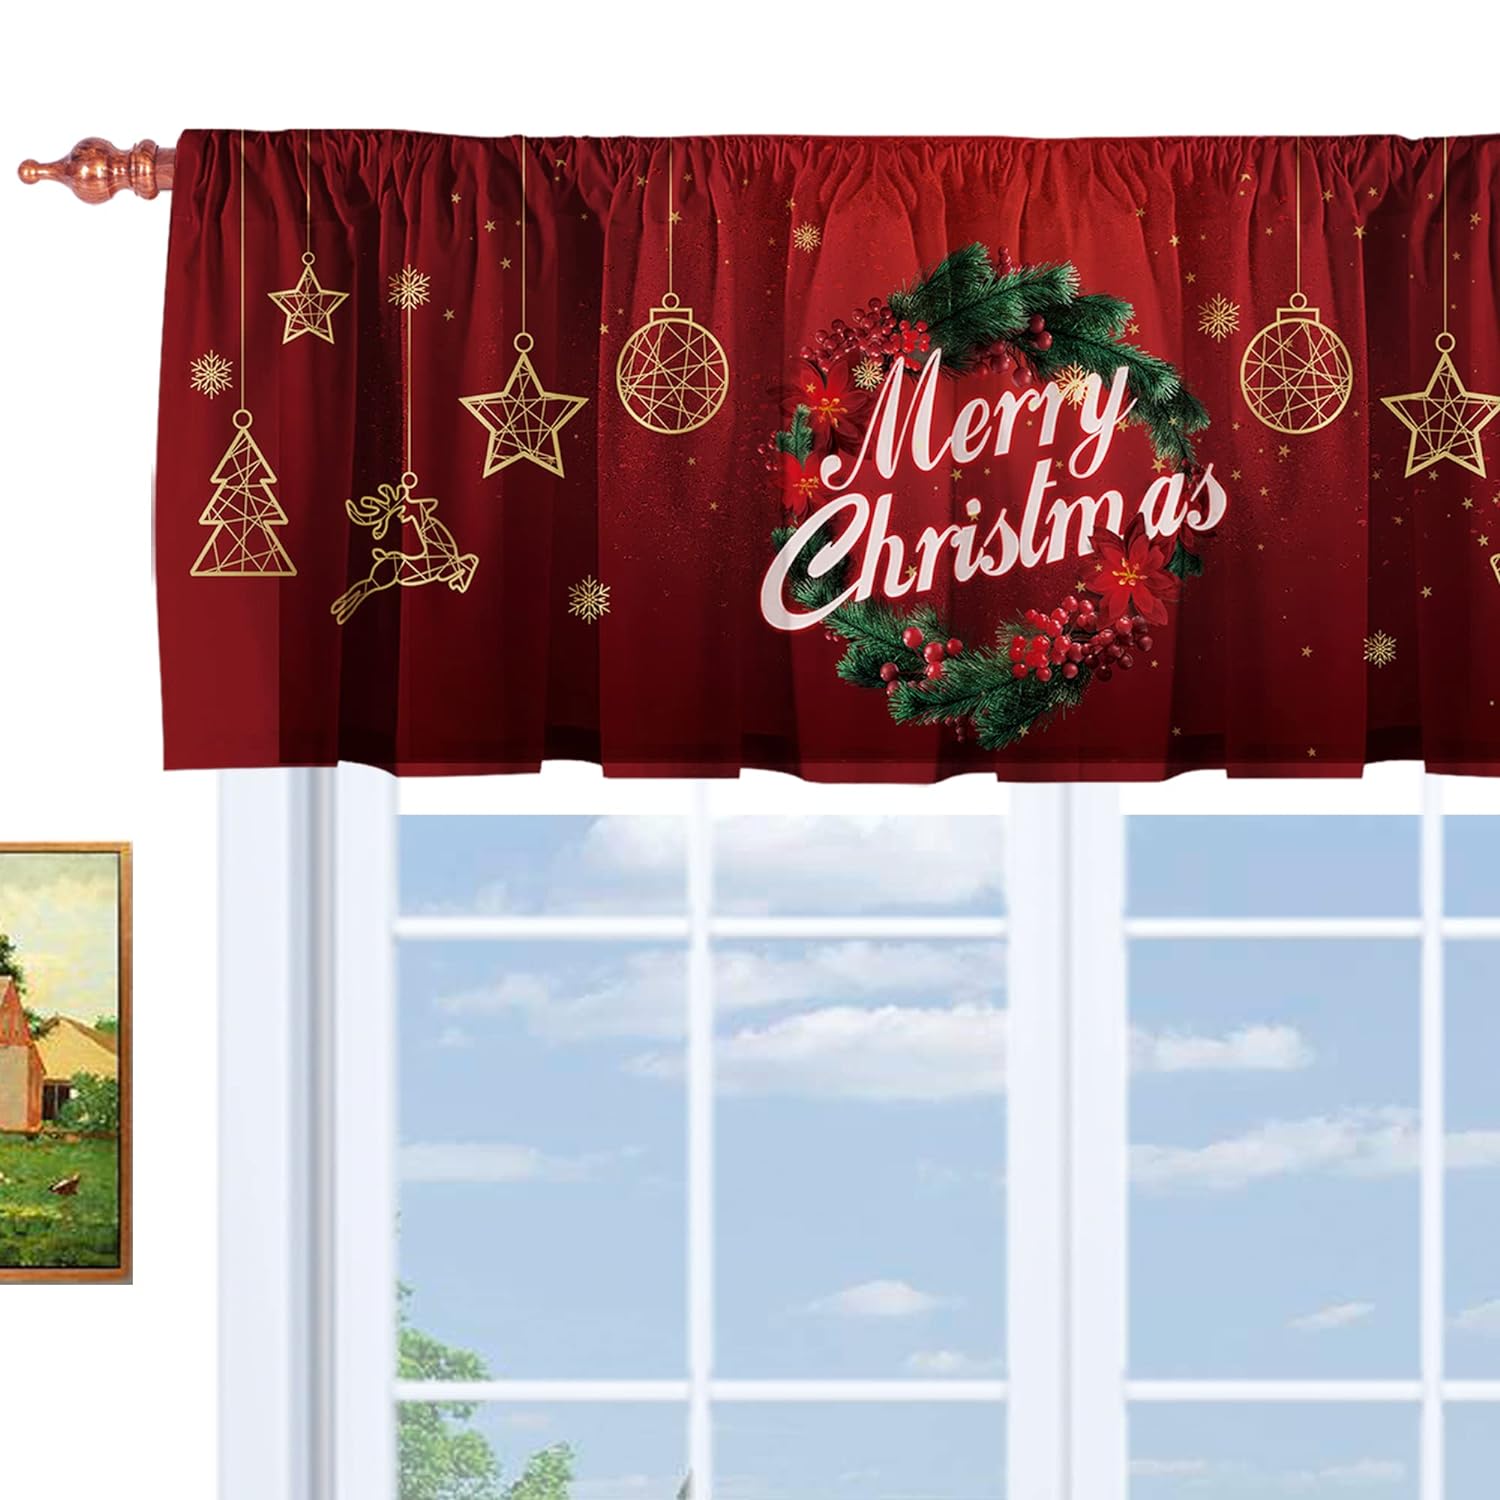 Great Choice Products Christmas Wreath Red Windows Valances Christmas Star Deer Ornament Kitchen Short Curtain Valances With Rod Pocket Merry ?